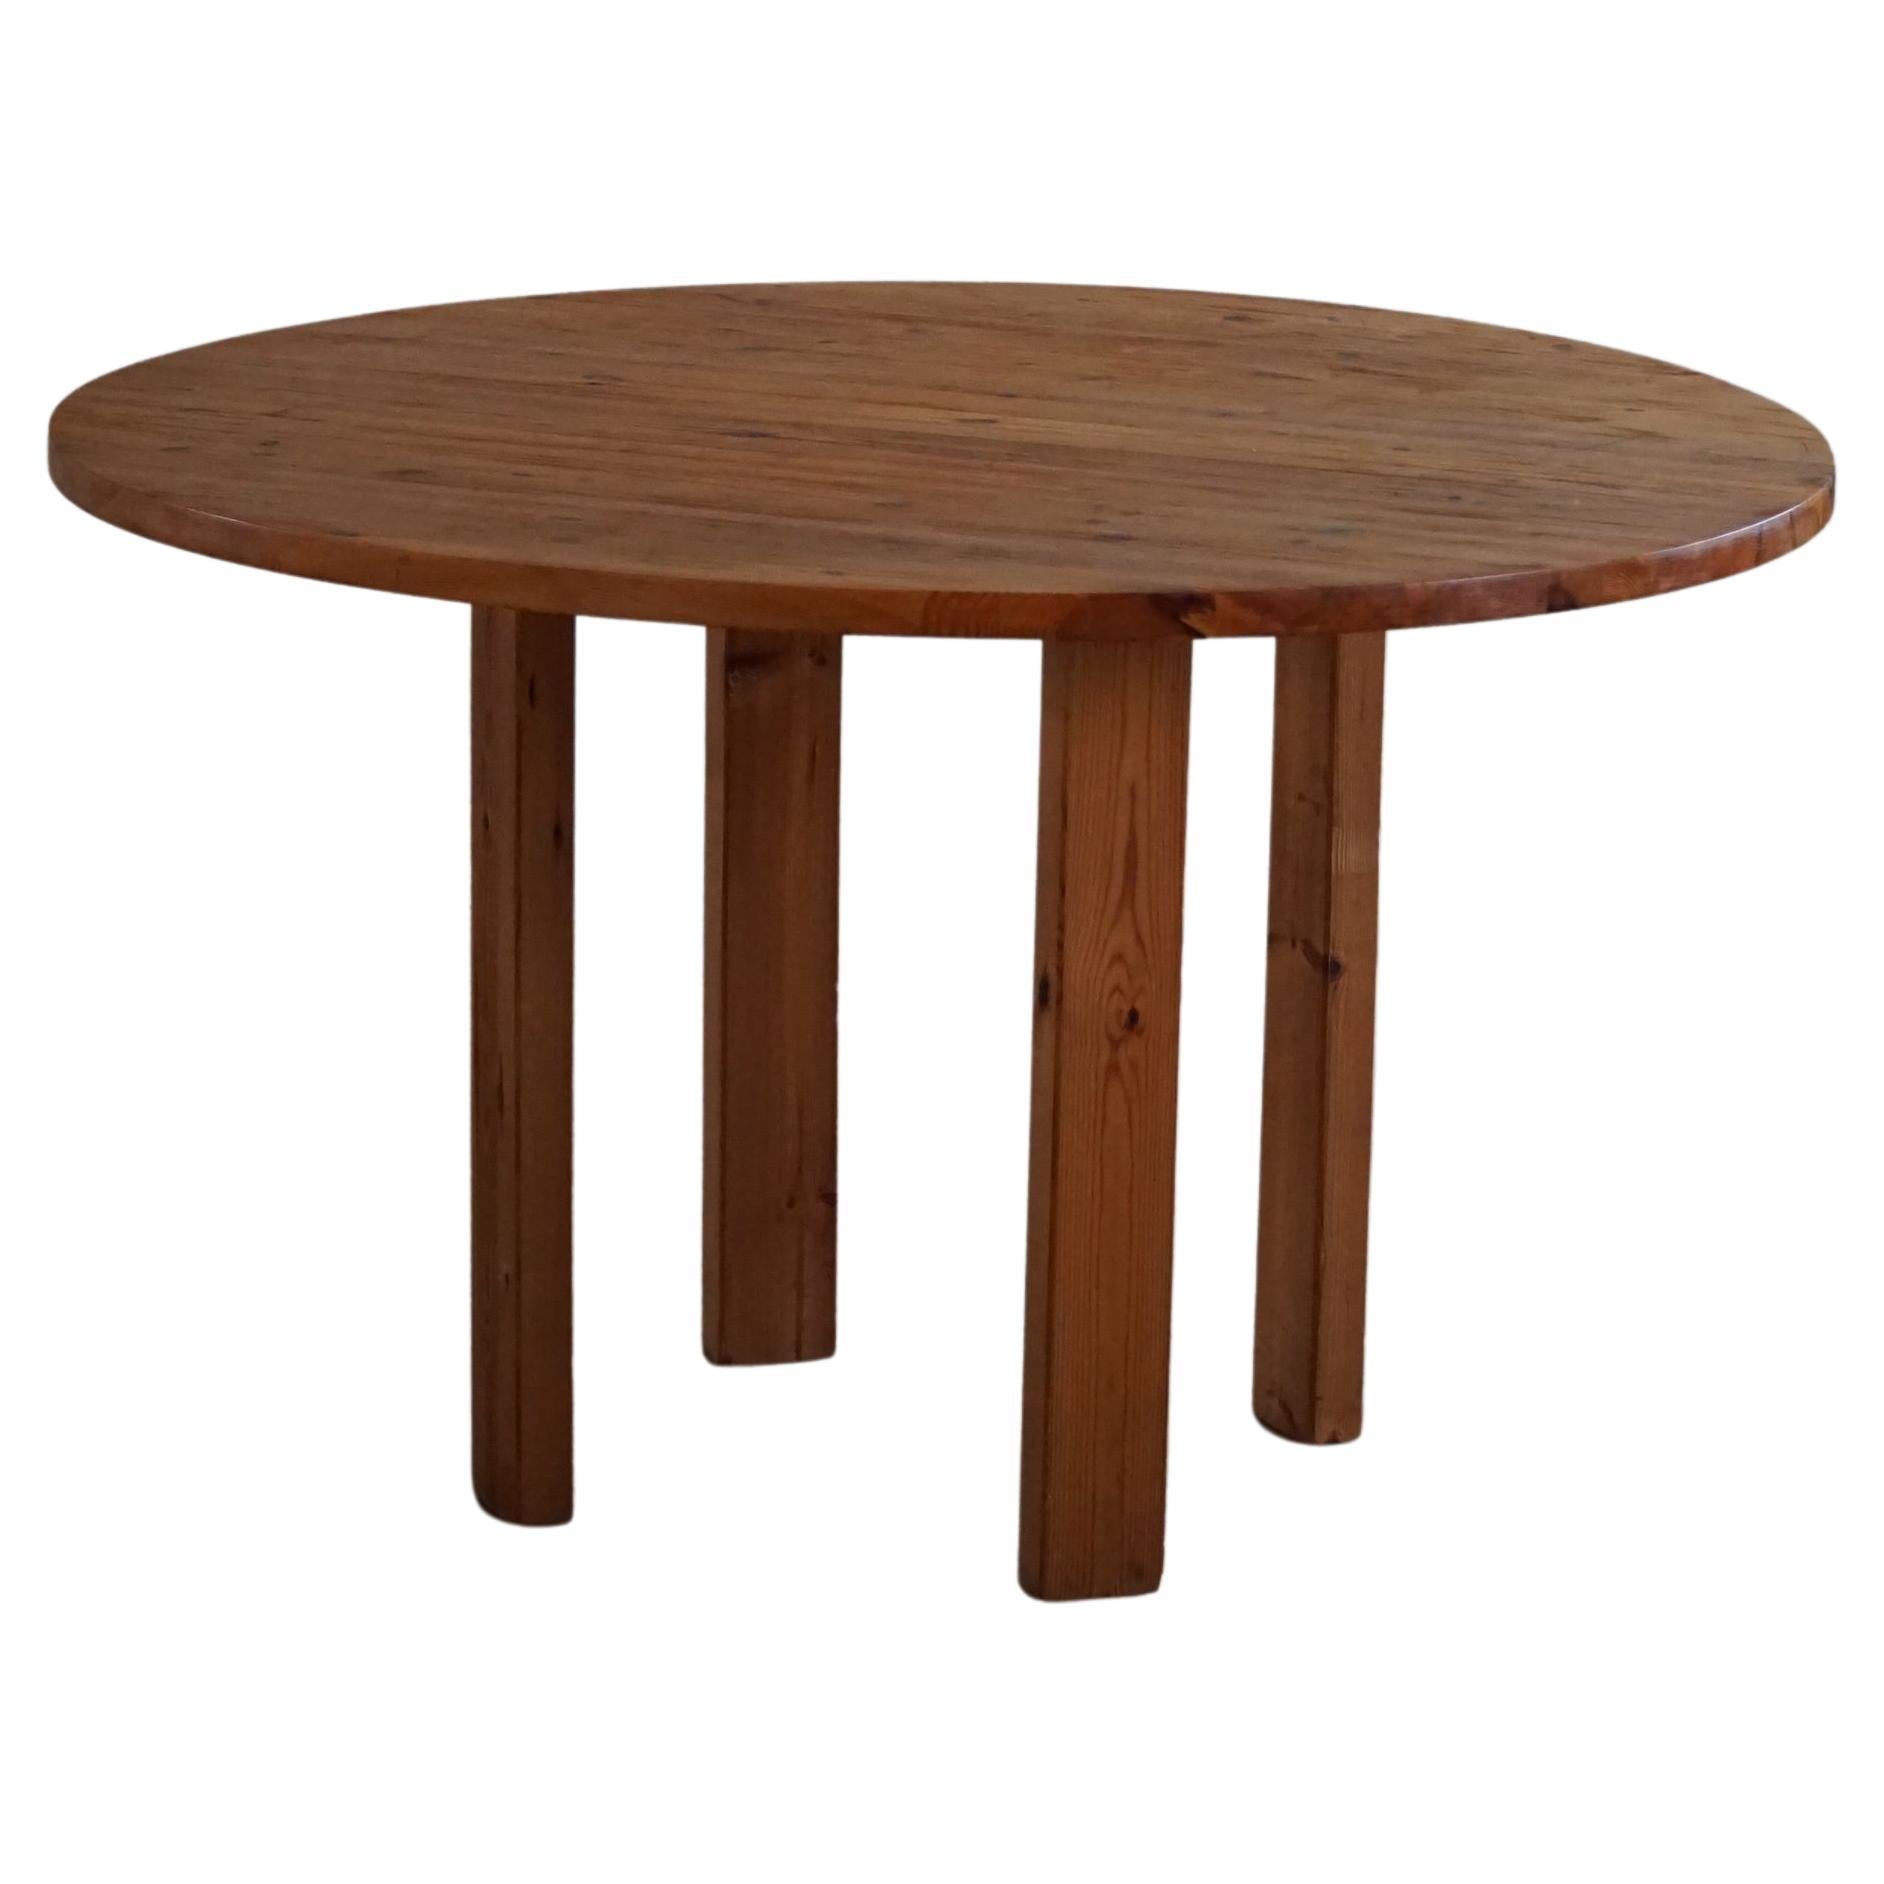 Danish Mid Century Modern, Round Dining Table in Solid Pine, Made in the 1970s